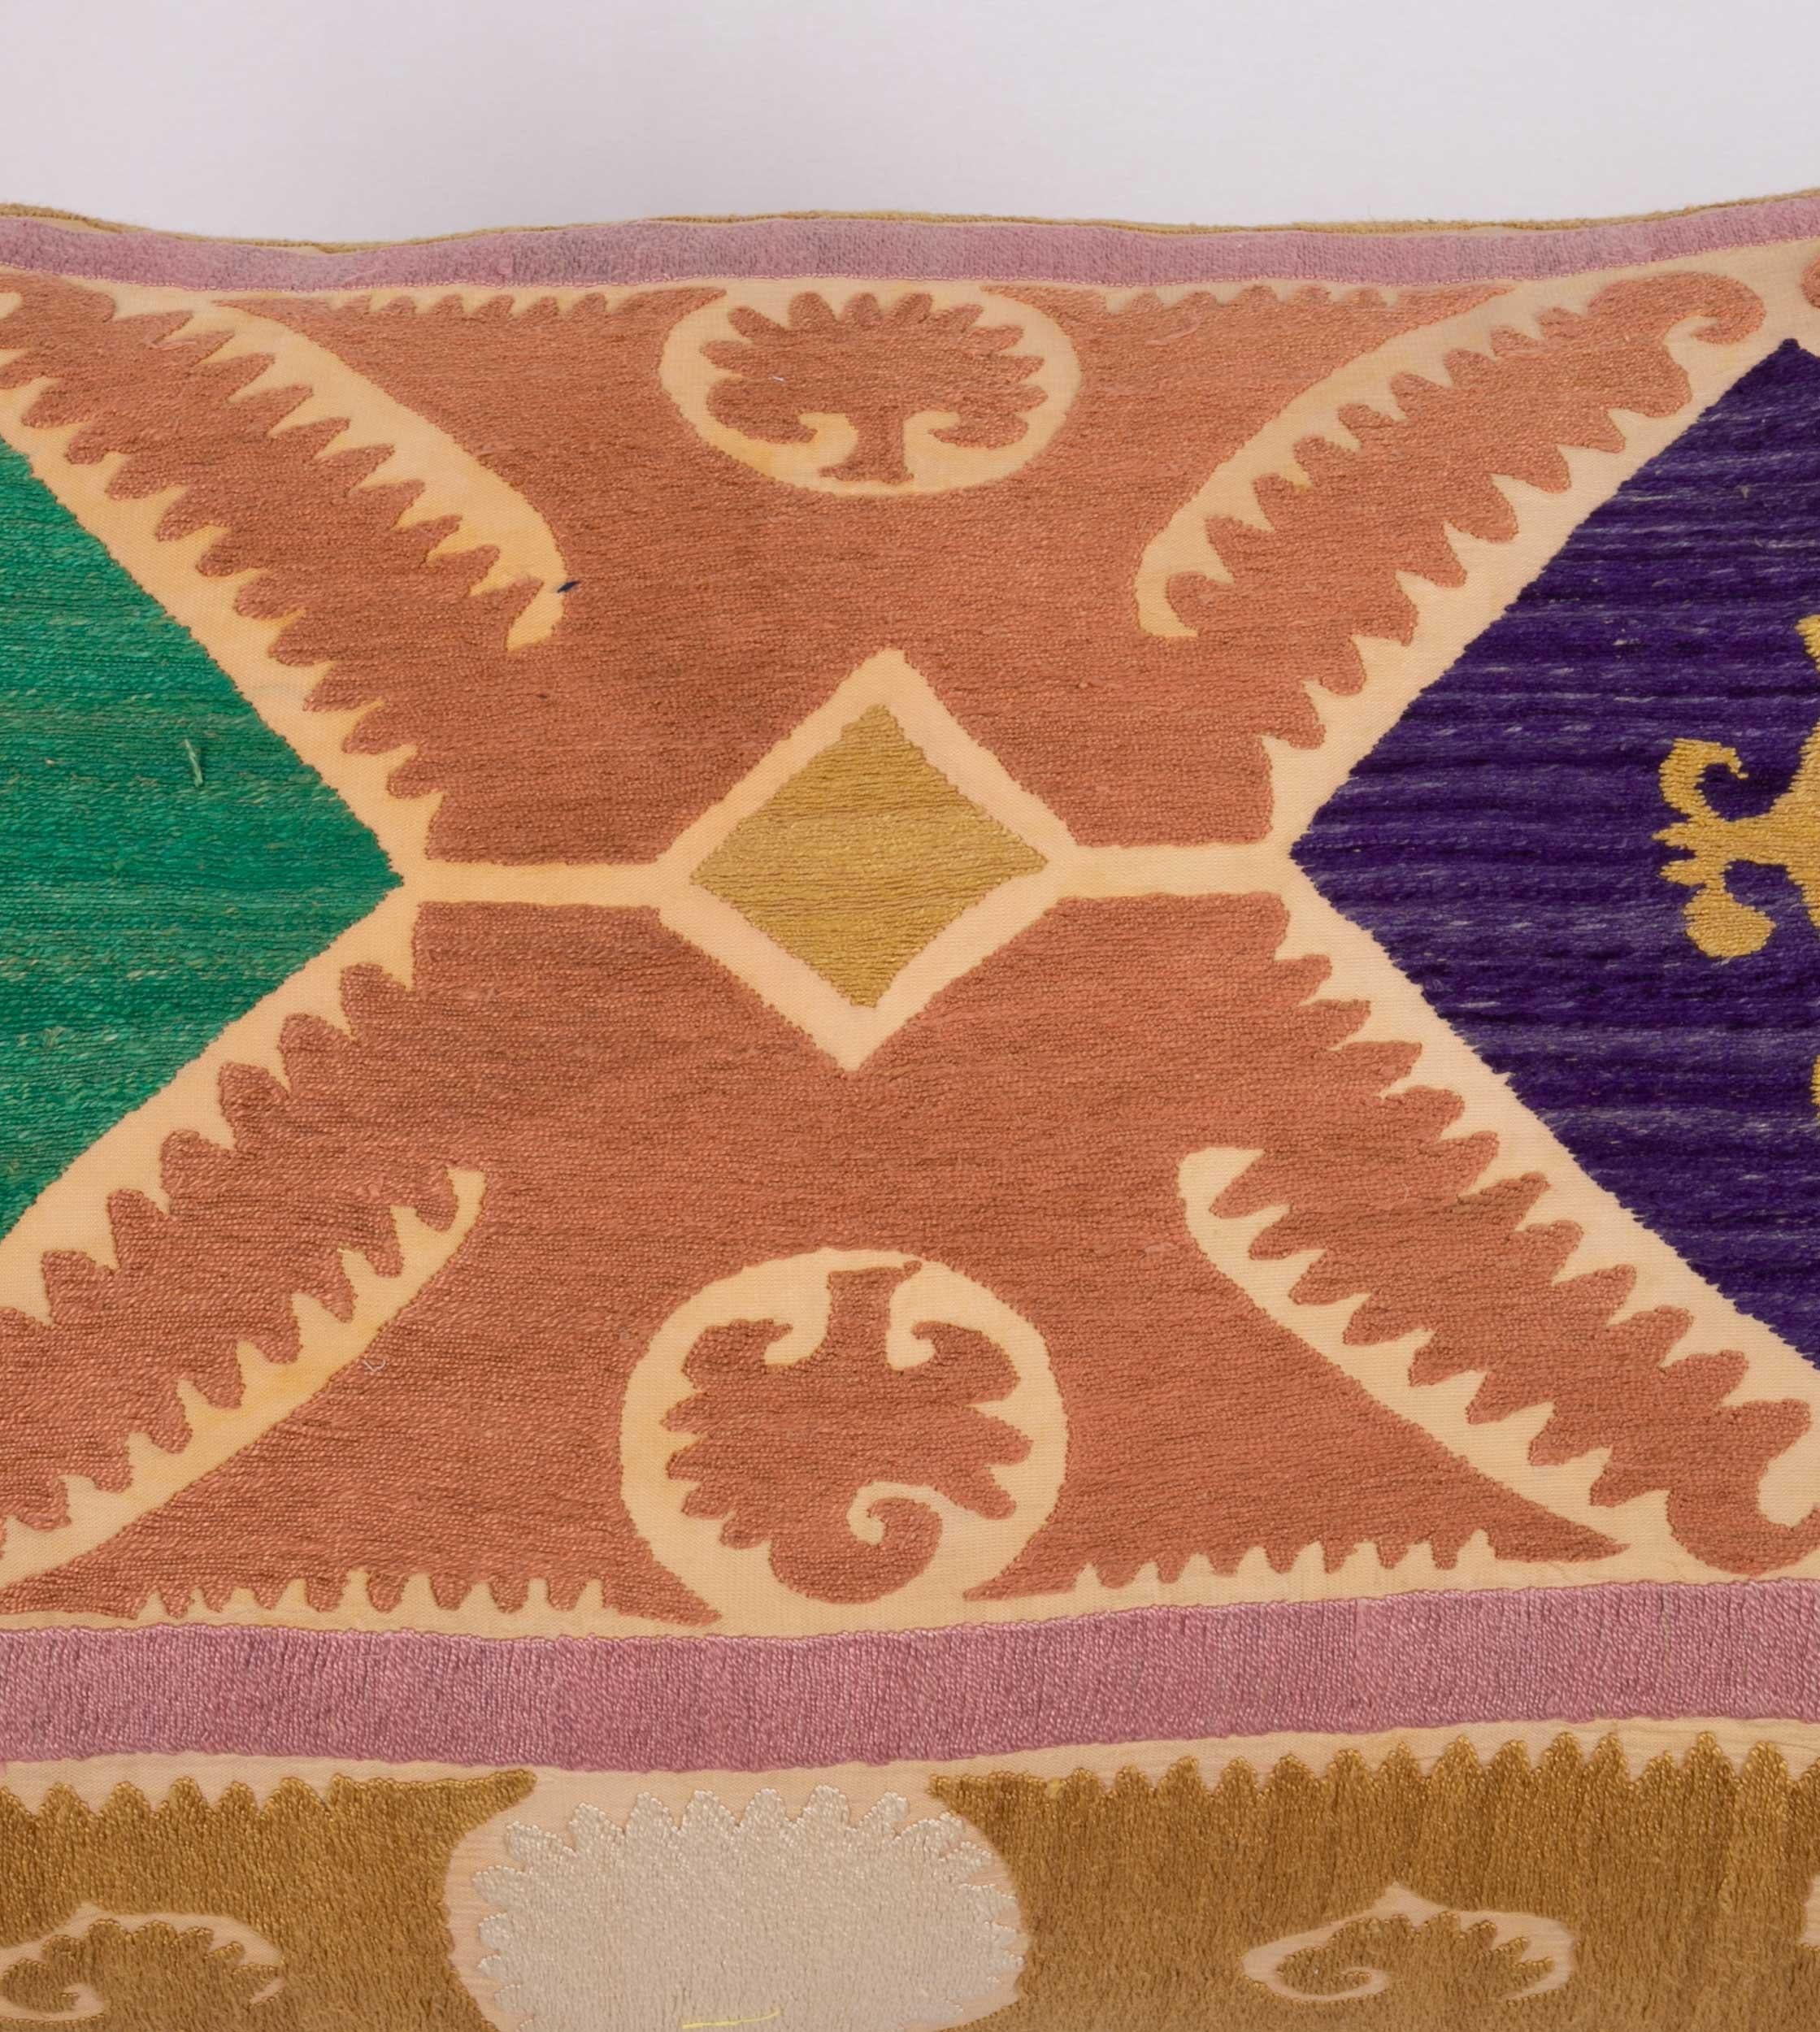 Embroidered Suzani Pillow Case Made from a Vintage Uzbek Suzani, Mid-20th Century For Sale